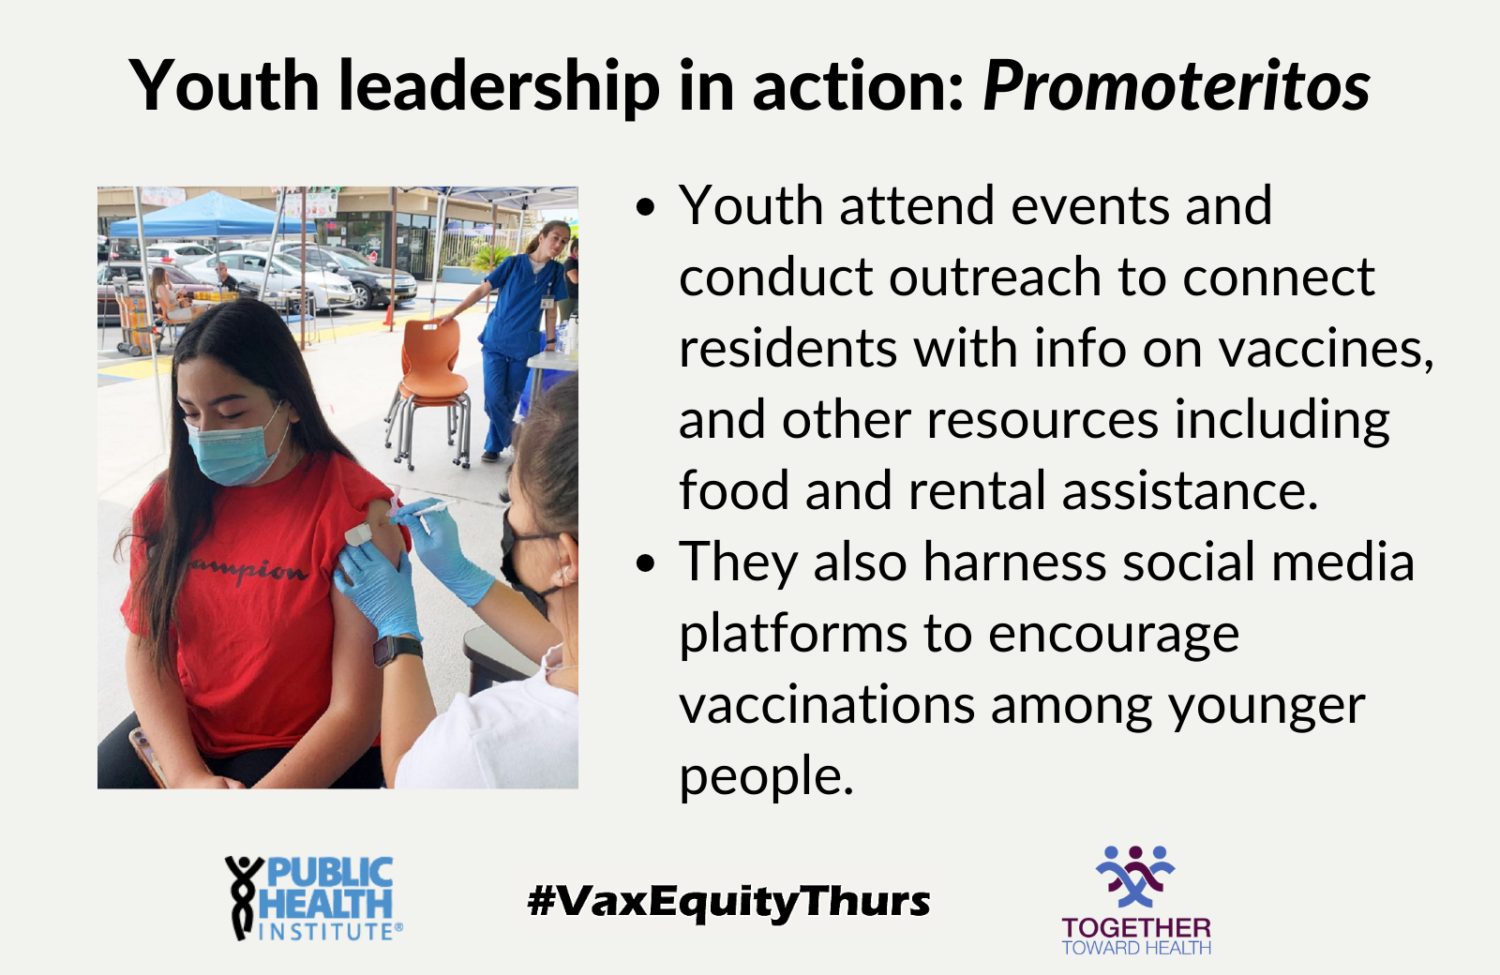 Youth leadership in action: Youth attend events and conduct outreach to connect residents with info on vaccines, and other resources including food and rental assistance. They also harness social media platforms to encourage vaccinations among younger people.